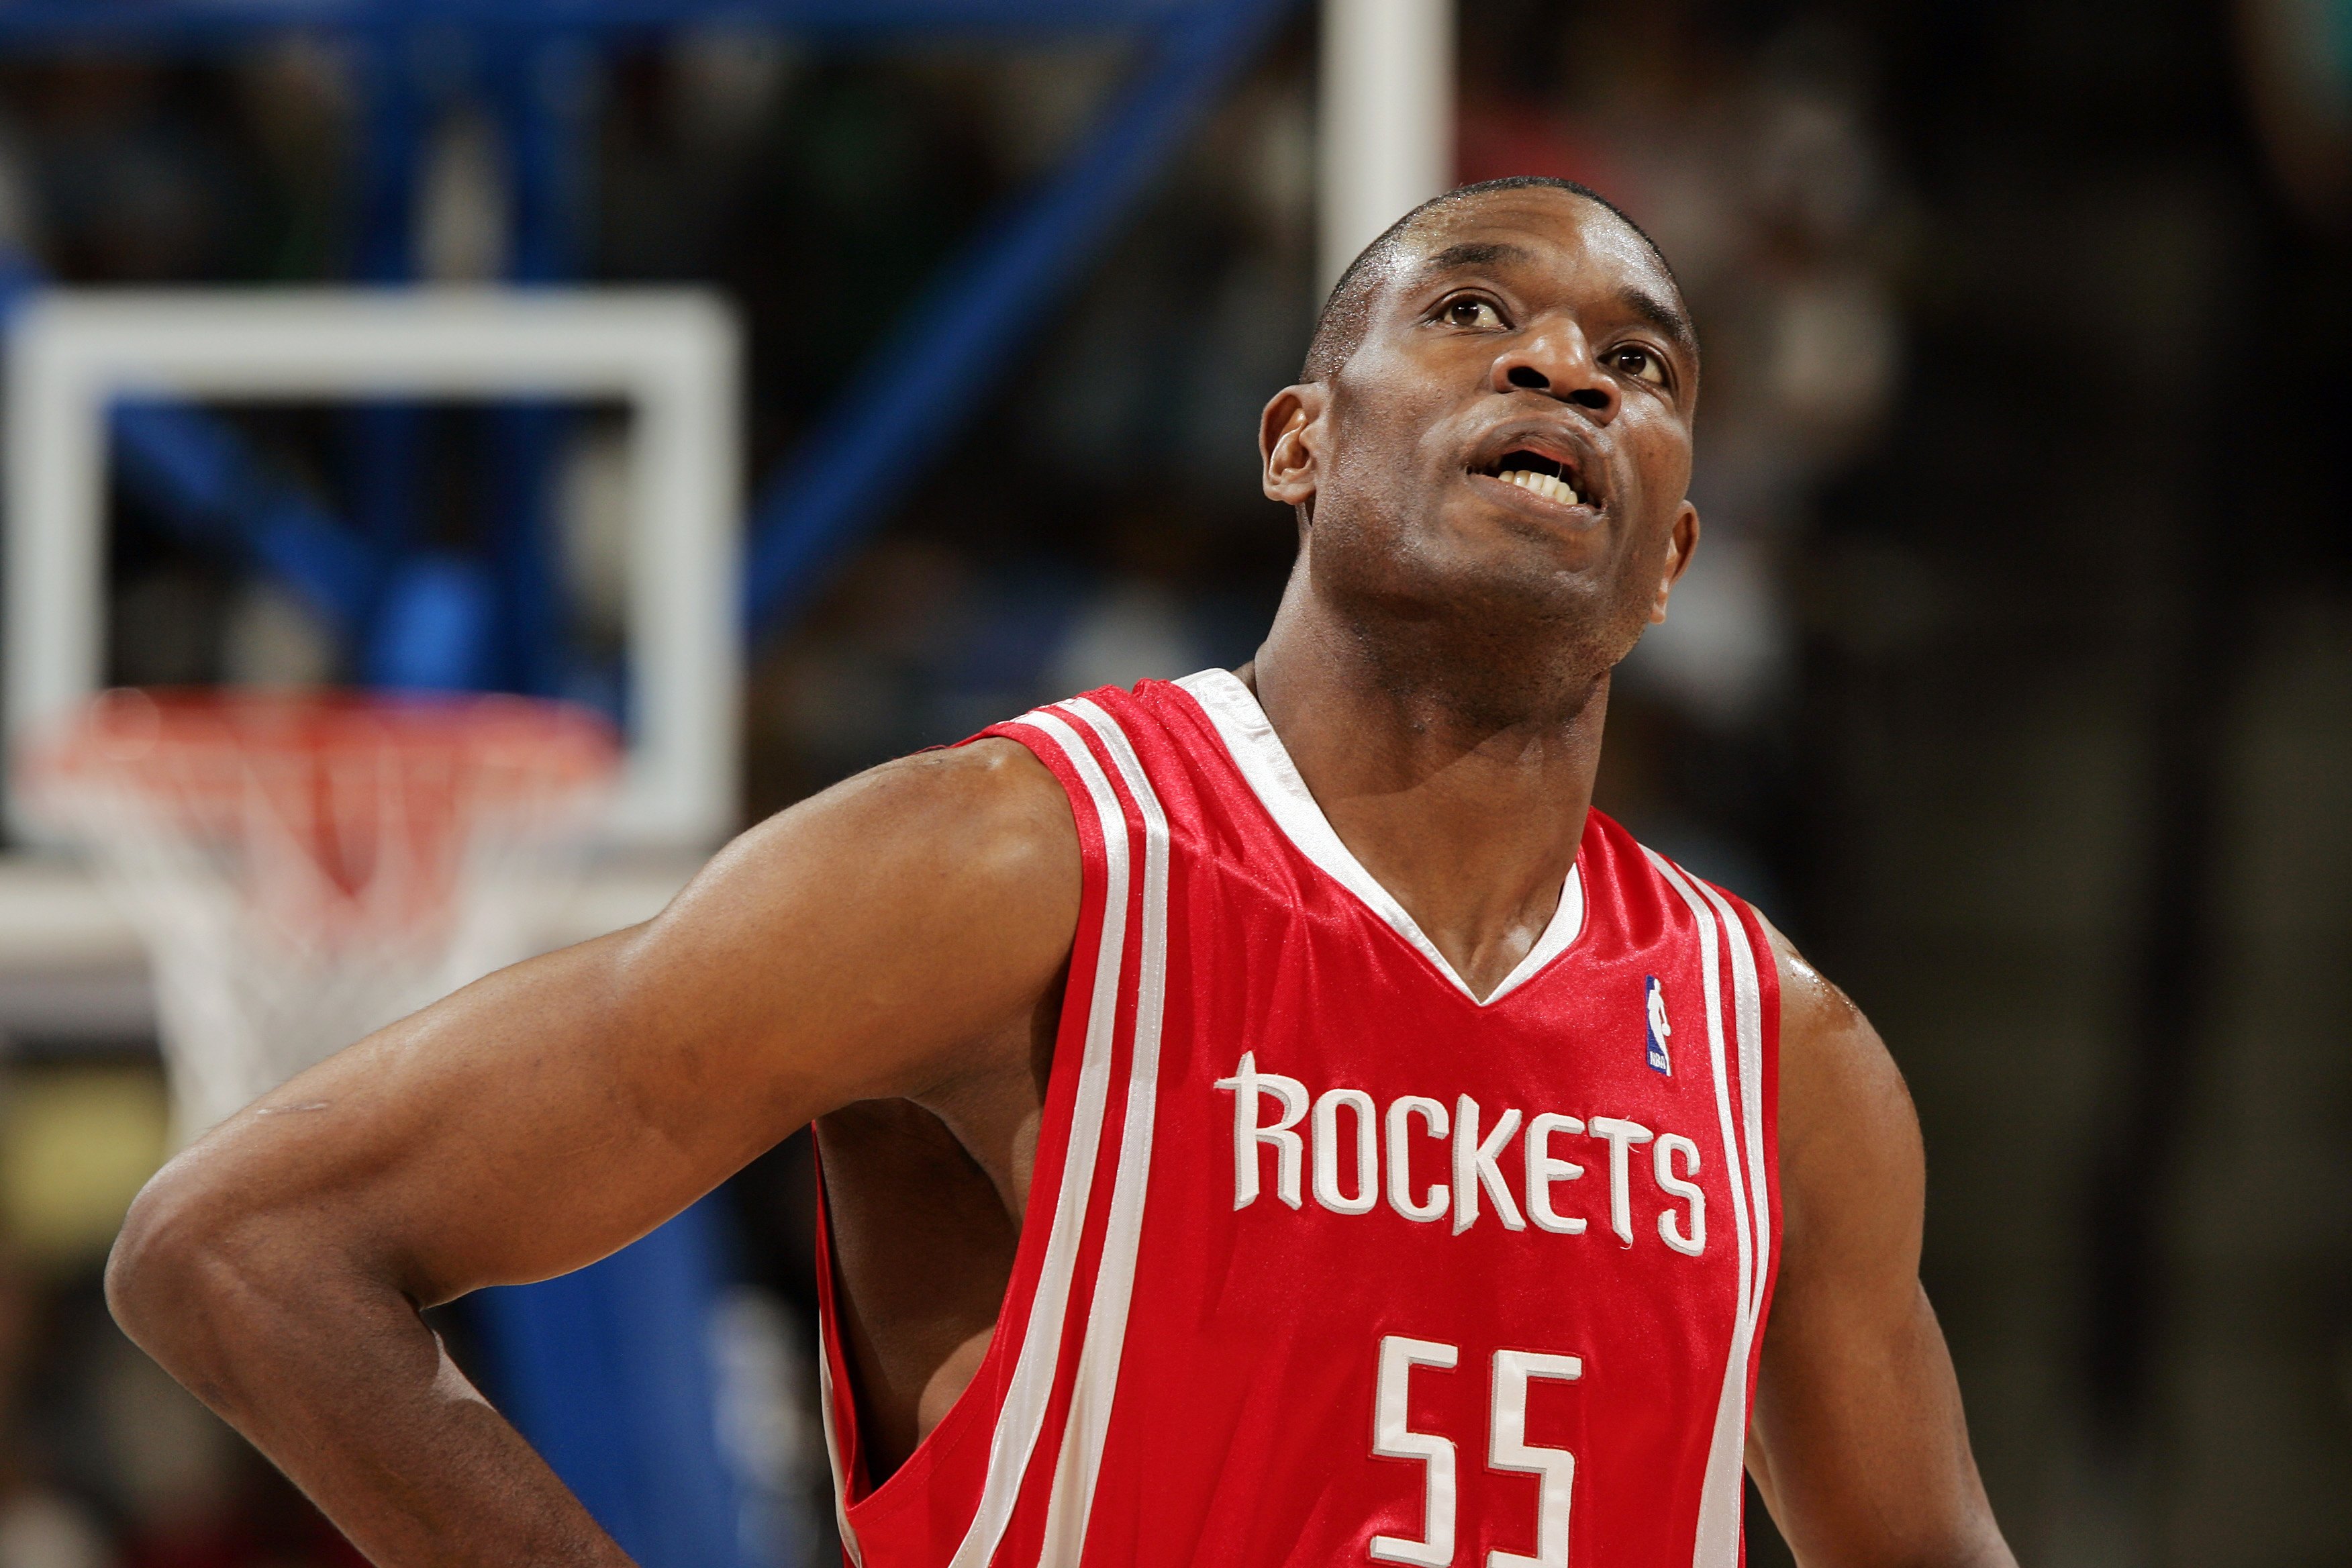 DENVER - APRIL 17:  Dikembe Mutombo #55 of Houston Rockets looks up at the clock in the fourth quarter against the Denver Nuggets on April 17, 2006 at the Pepsi Center in Denver, Colorado. The Rockets won 86-83.  NOTE TO USER: USER expressly acknowledges